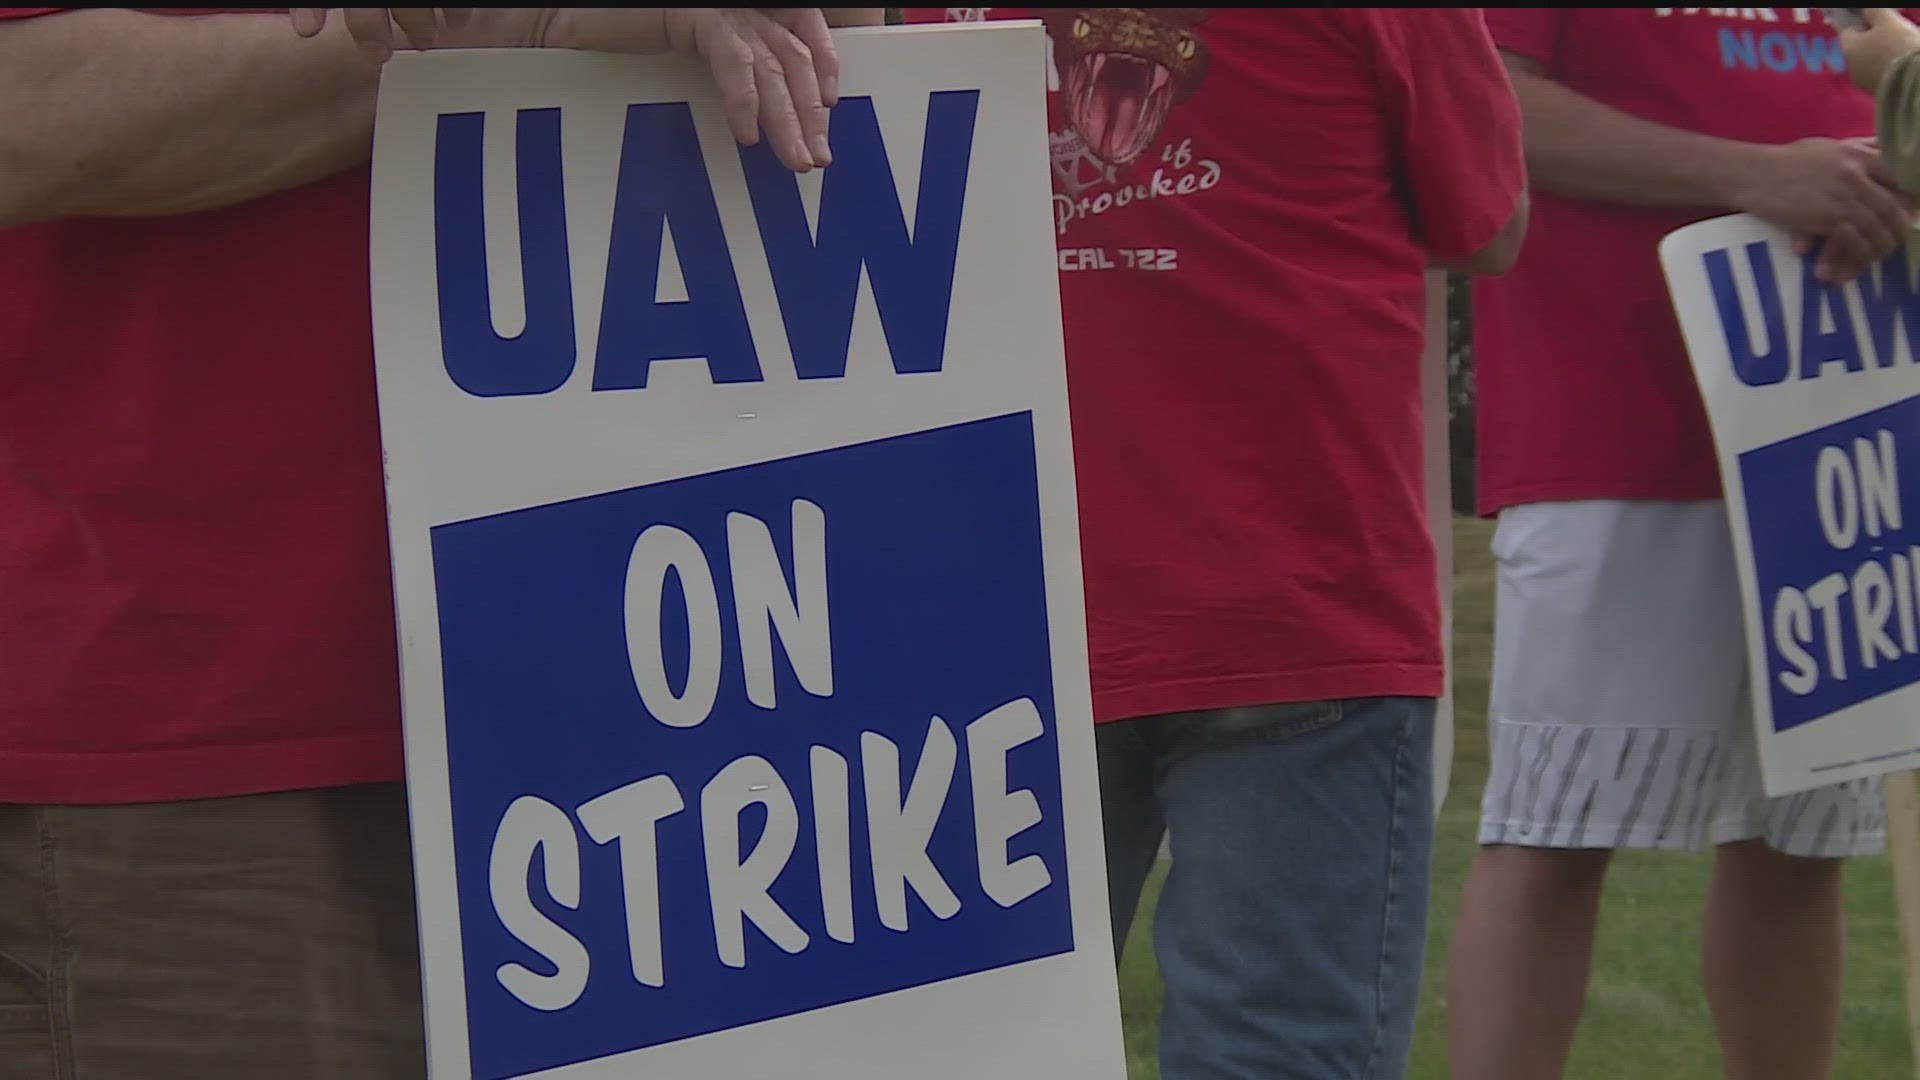 UAW President Shawn Fain called on workers to walk out of 38 General Motors and Stellantis plants across 20 states on Friday afternoon.